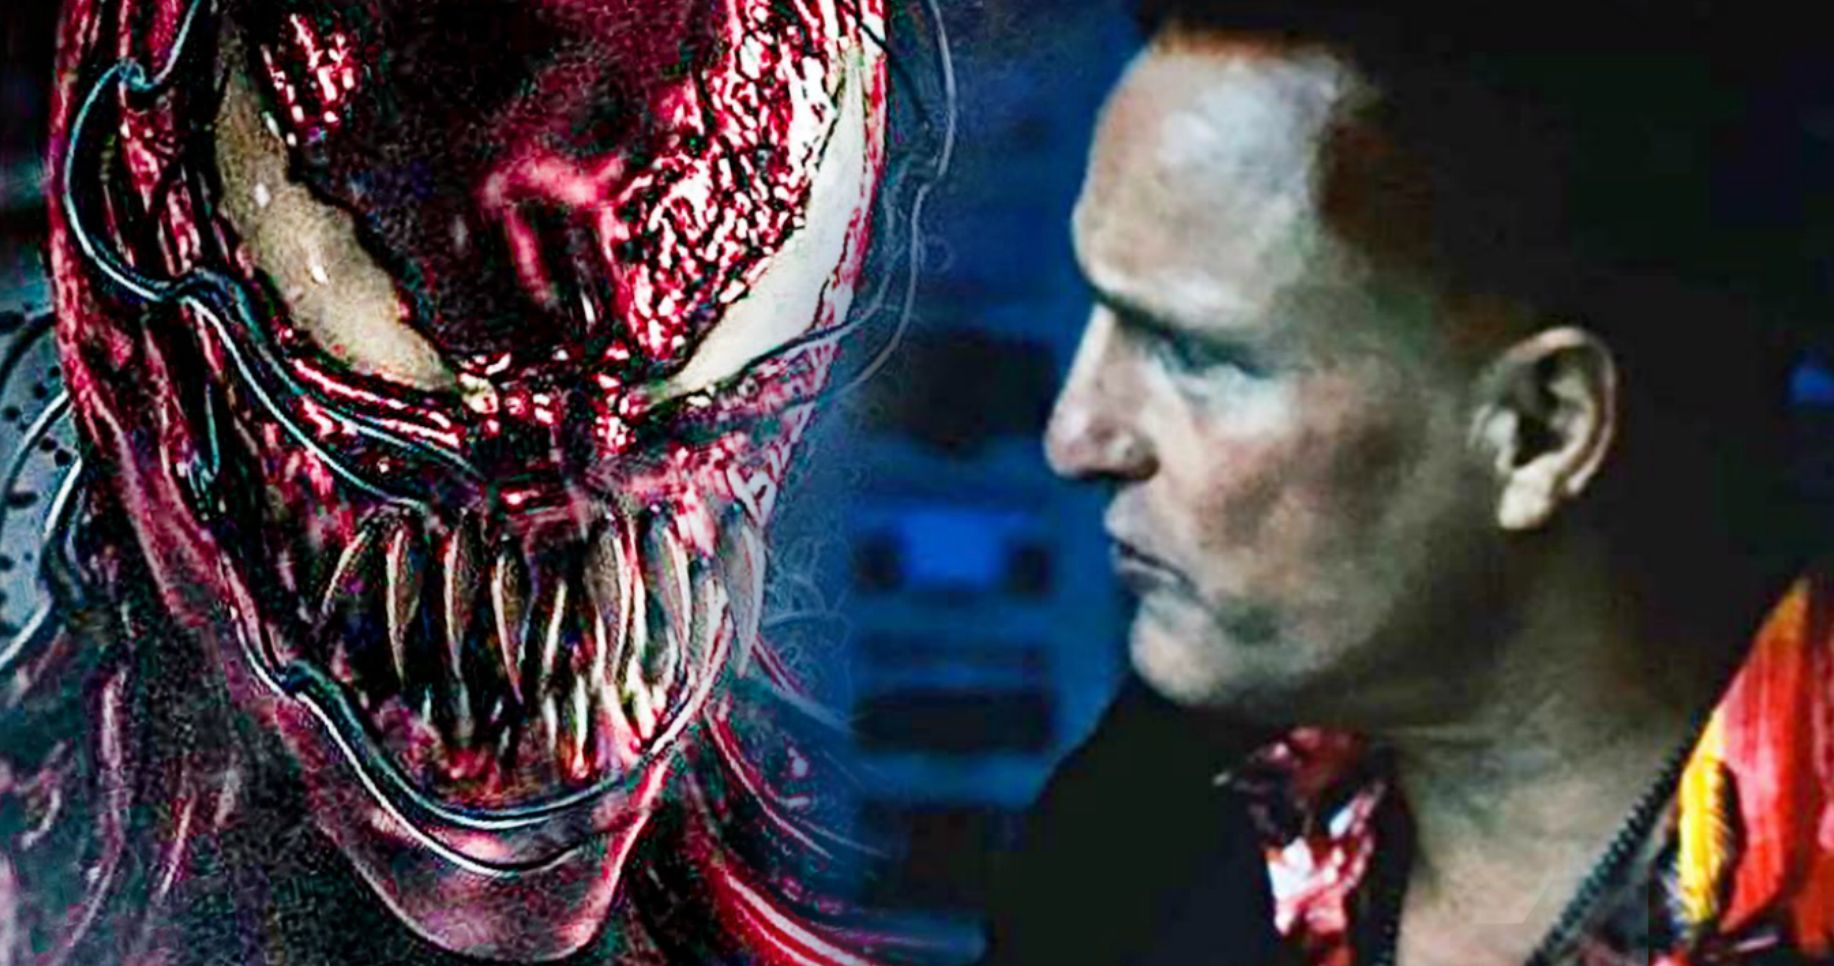 Venom 2 Set Video Teases the Arrival of Woody Harrelson as Carnage